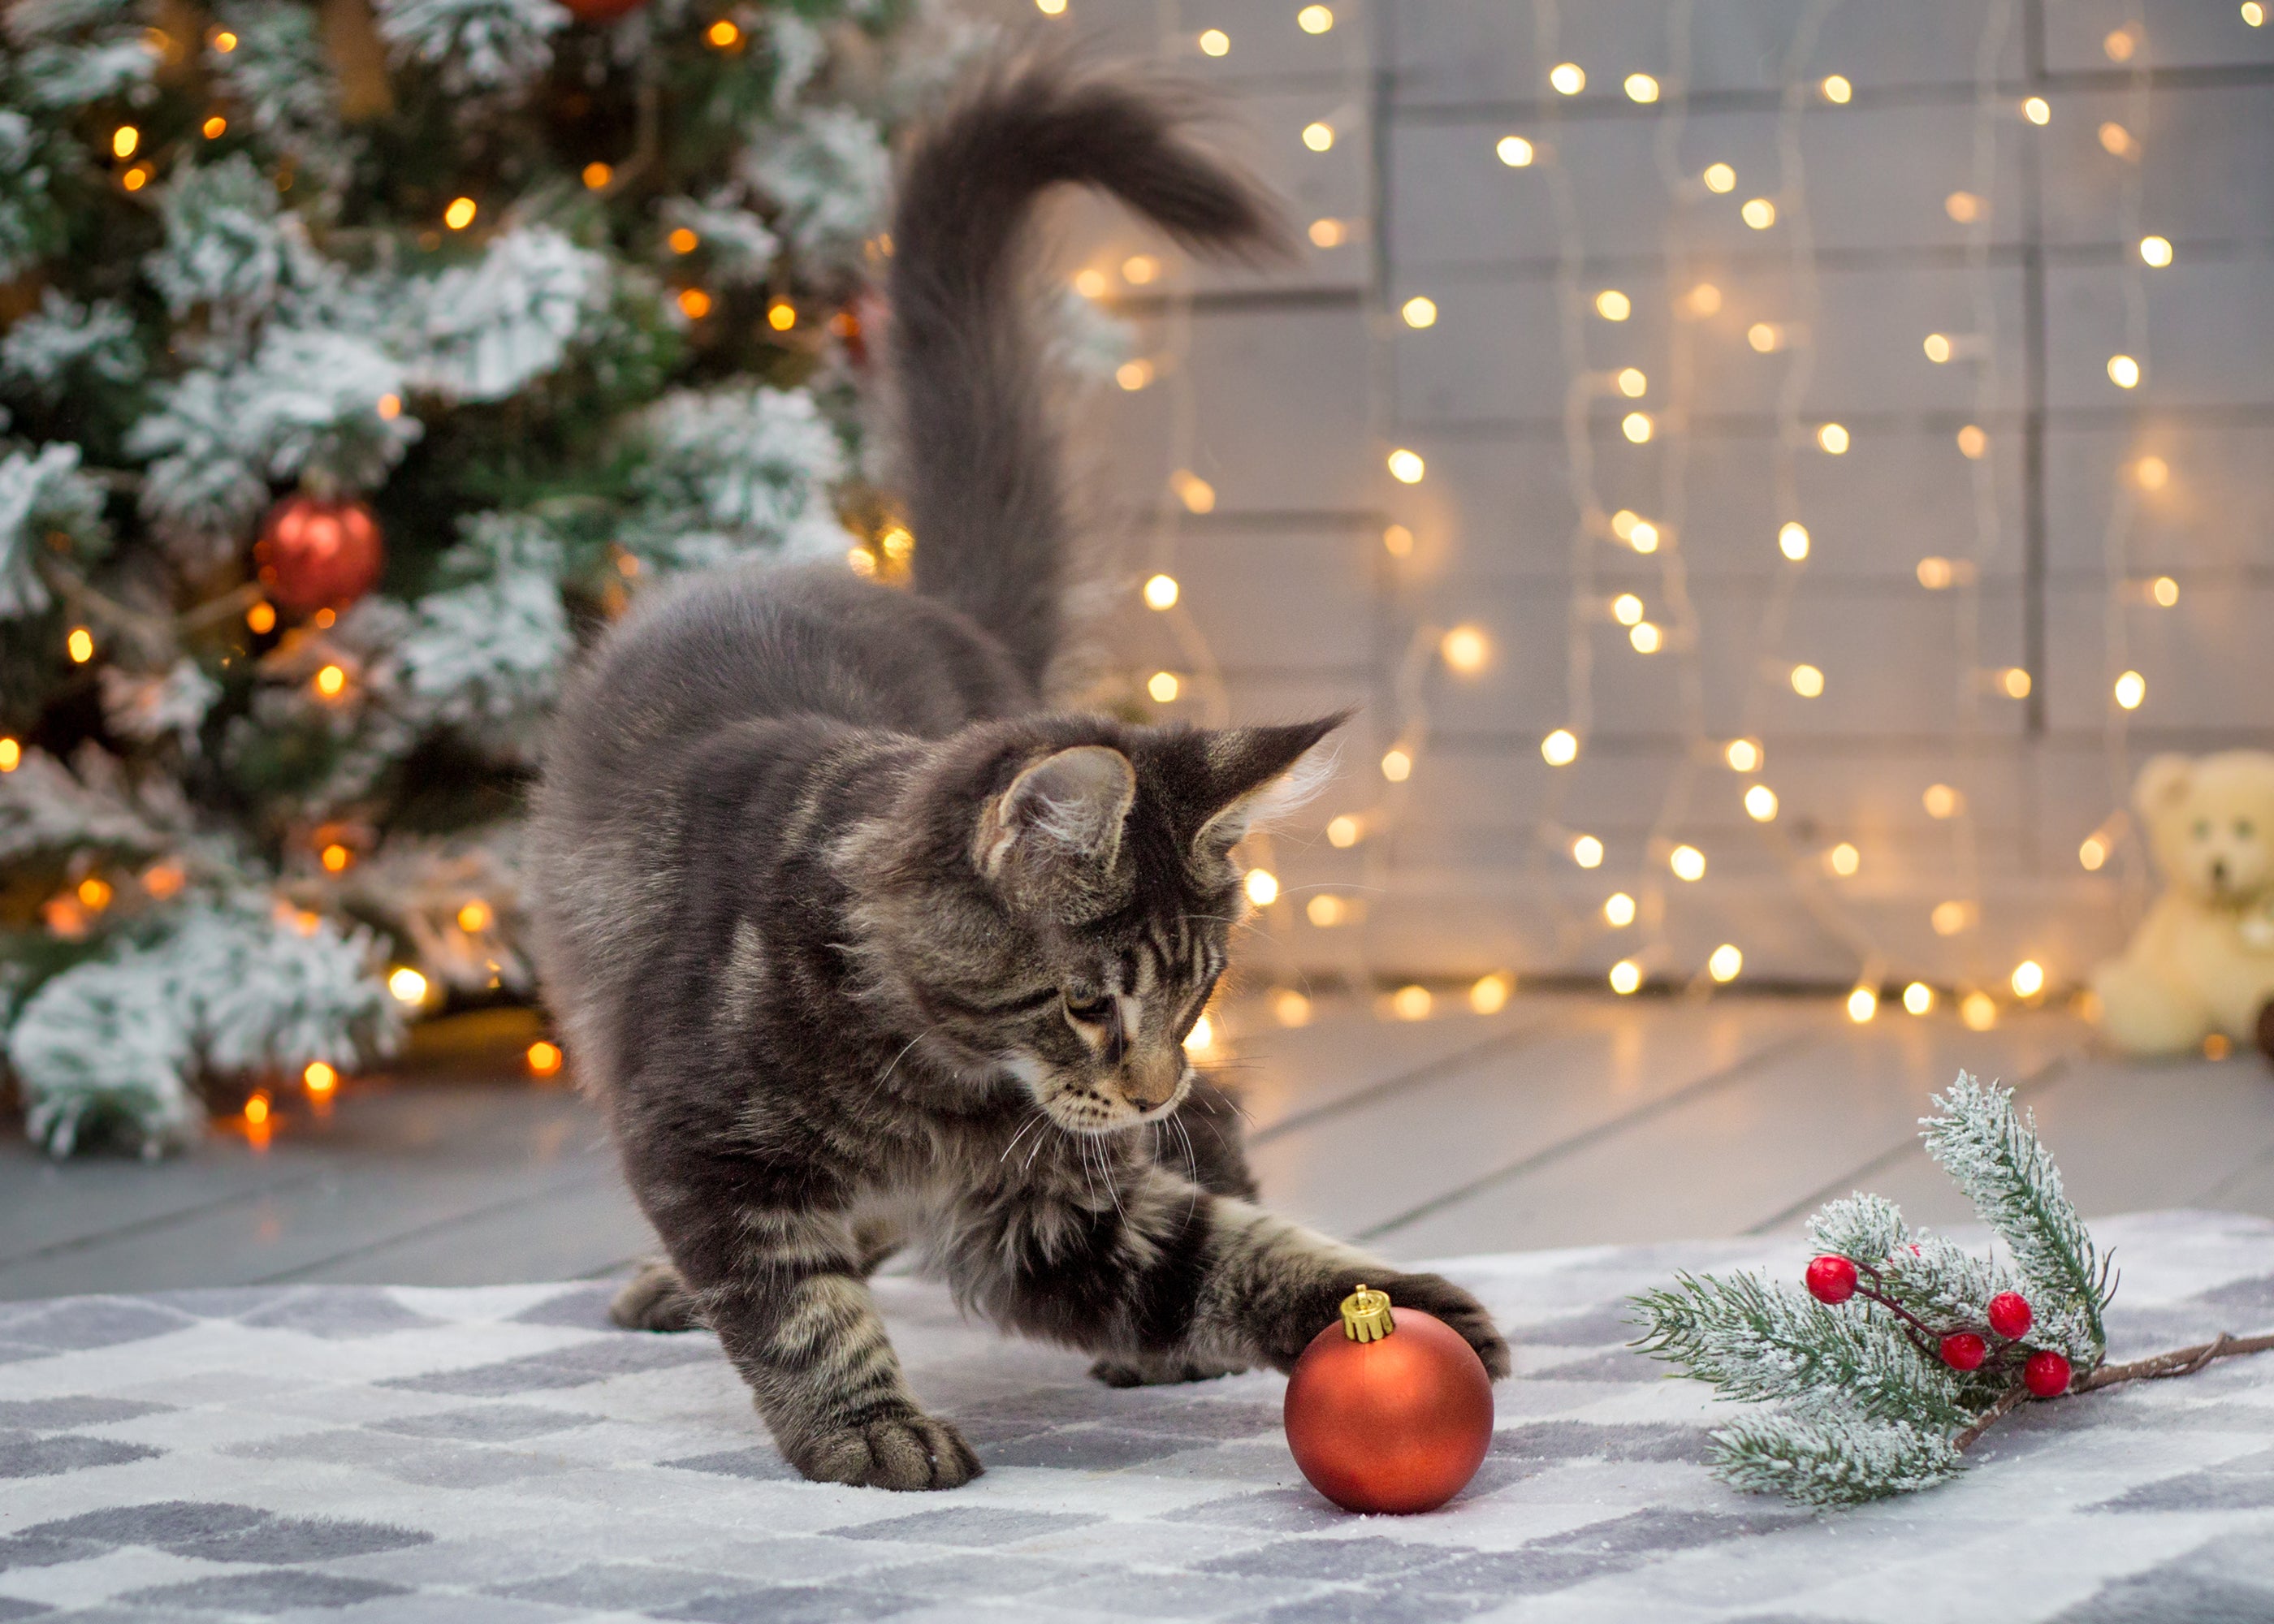 Cat playing with a red bauble by the Christmas tree